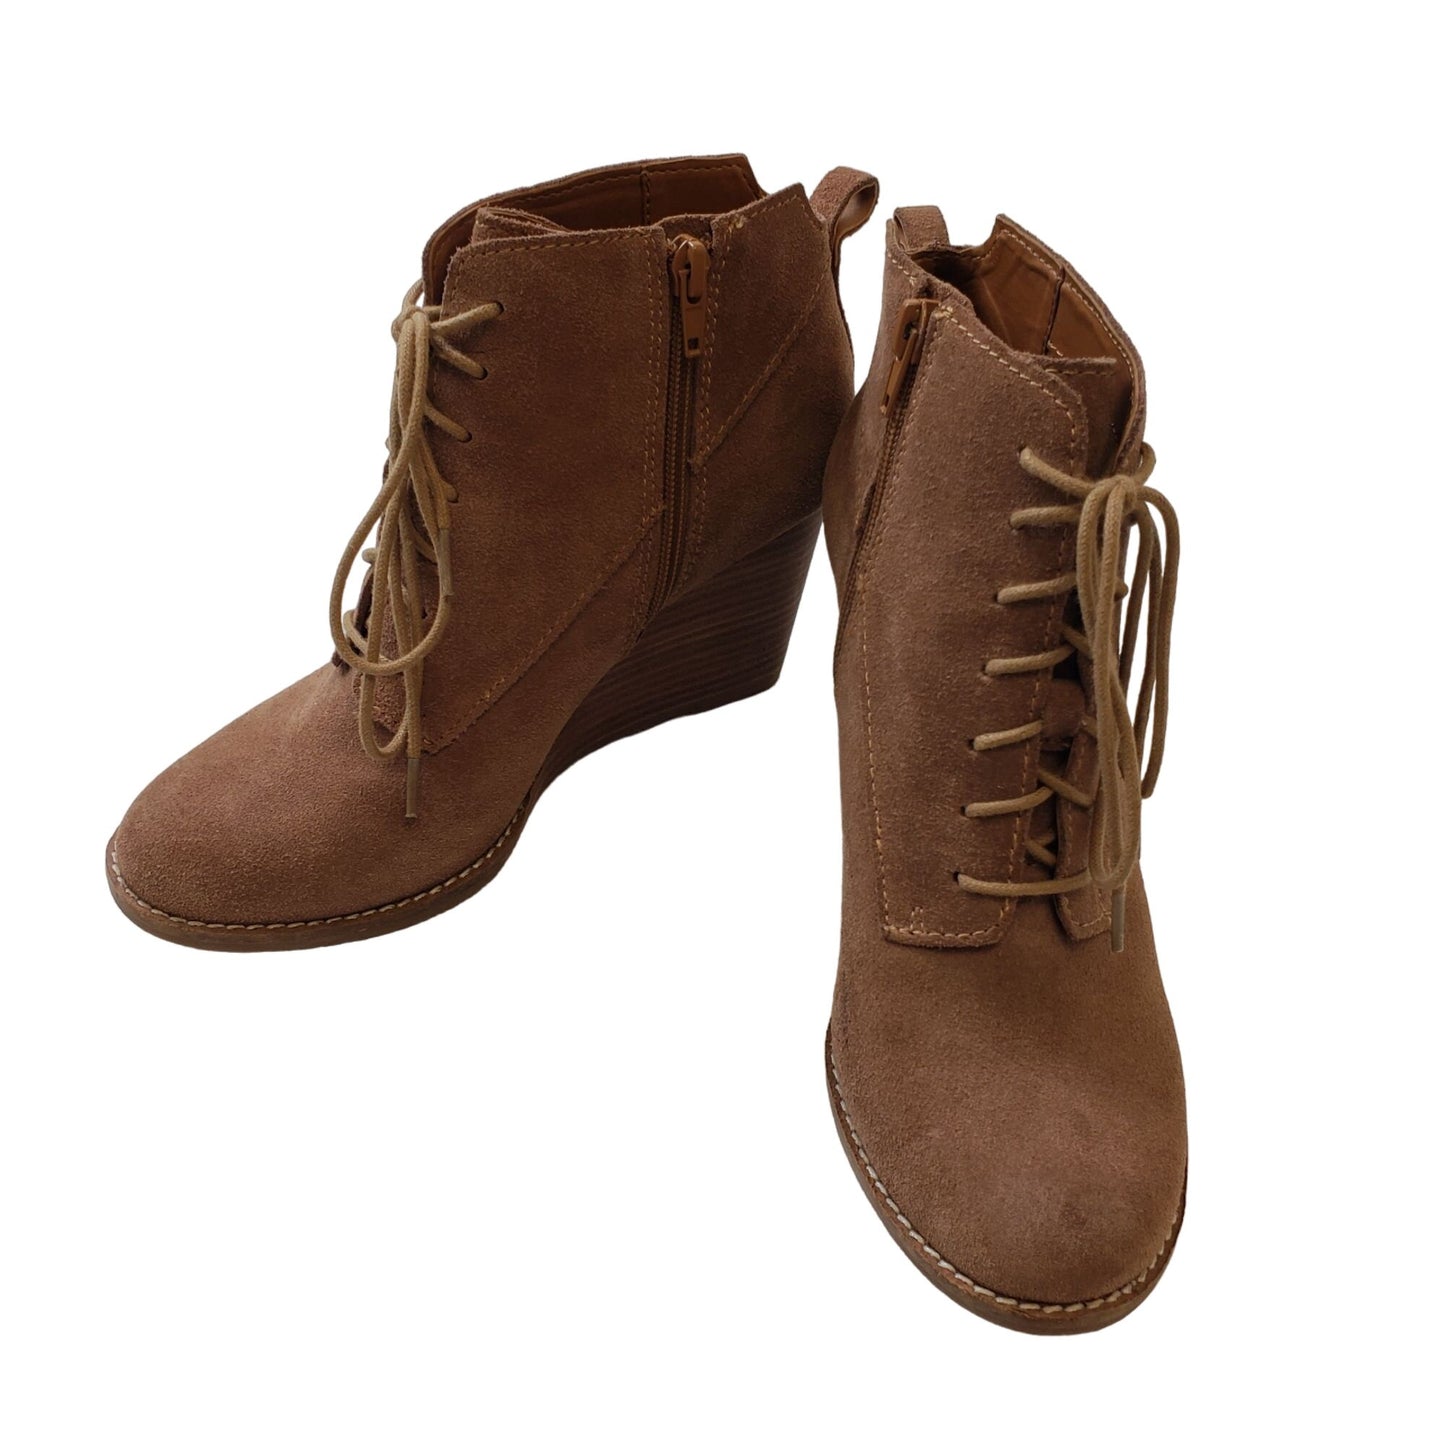 Lucky Brand Suede Leather Wedge Lace-Up Booties Size 7